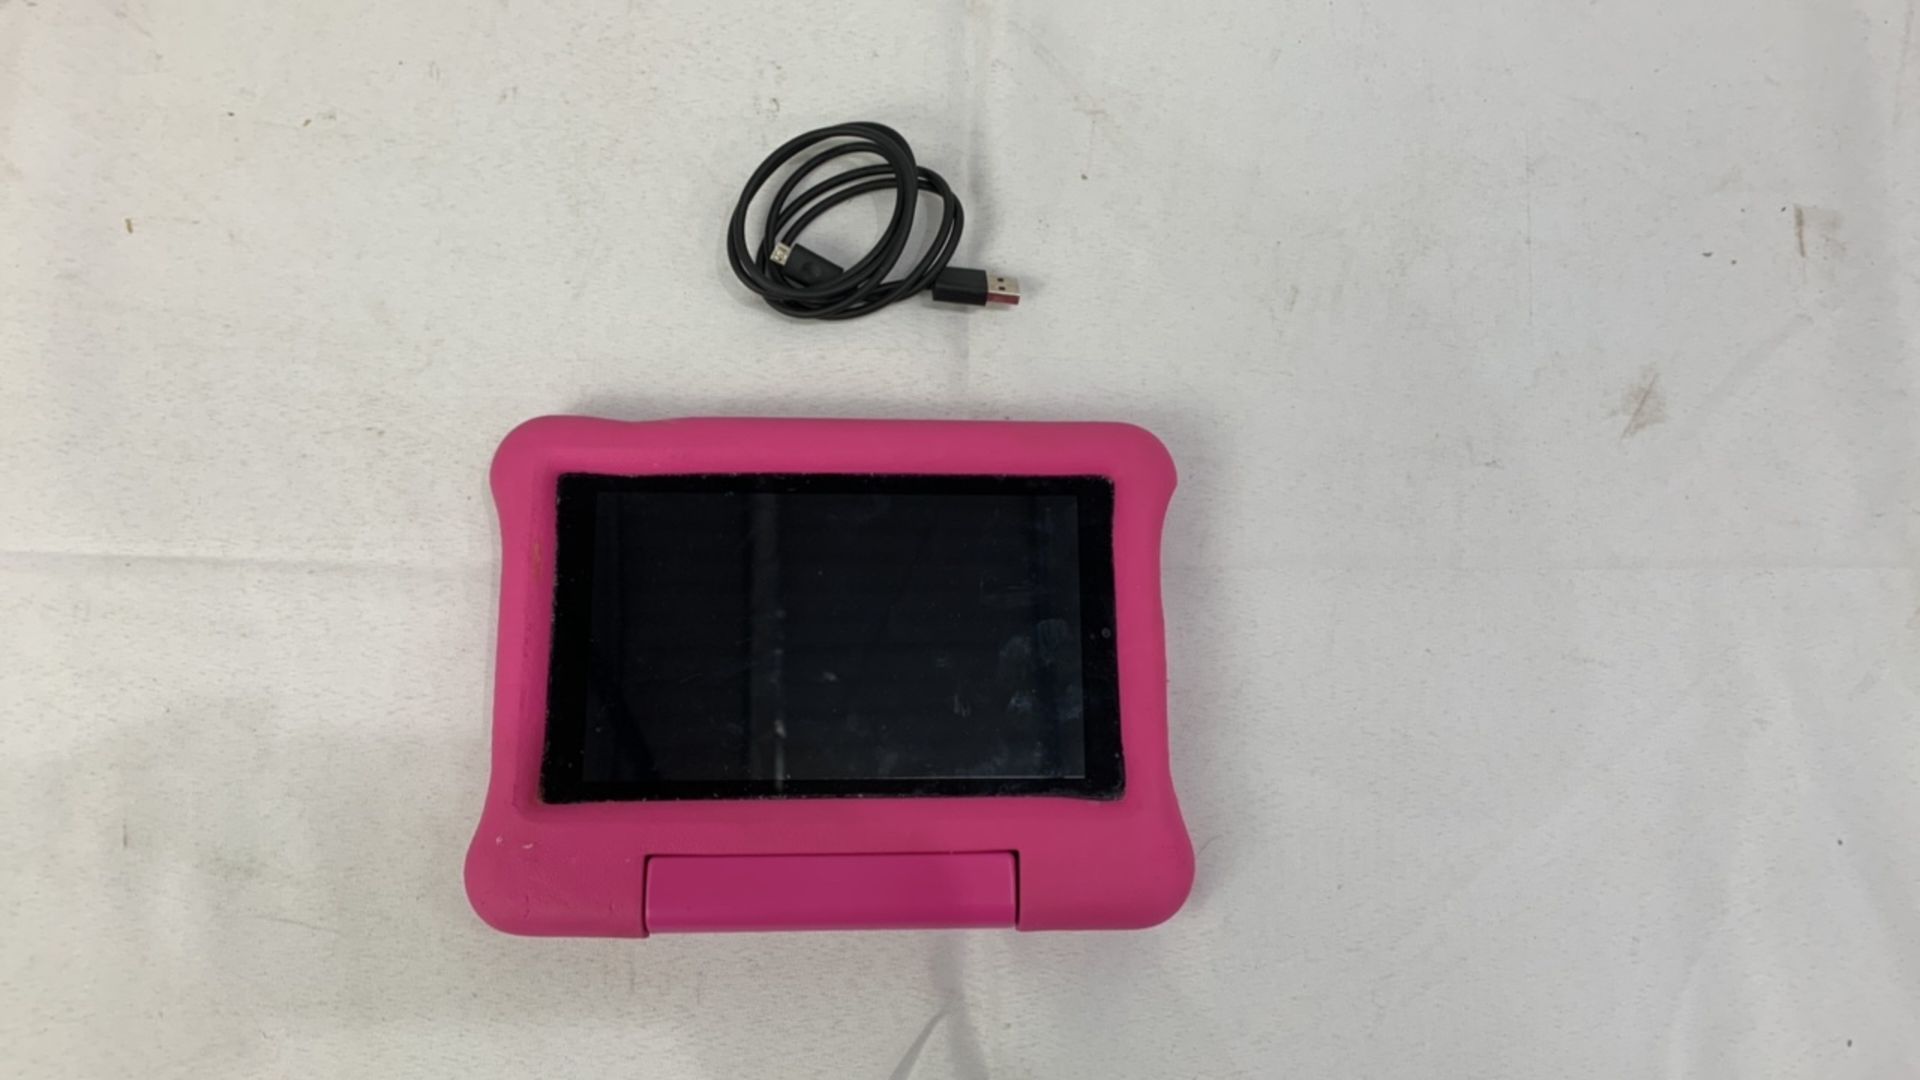 AMAZON FIRE 7 KIDS EDITION TABLET - PINK